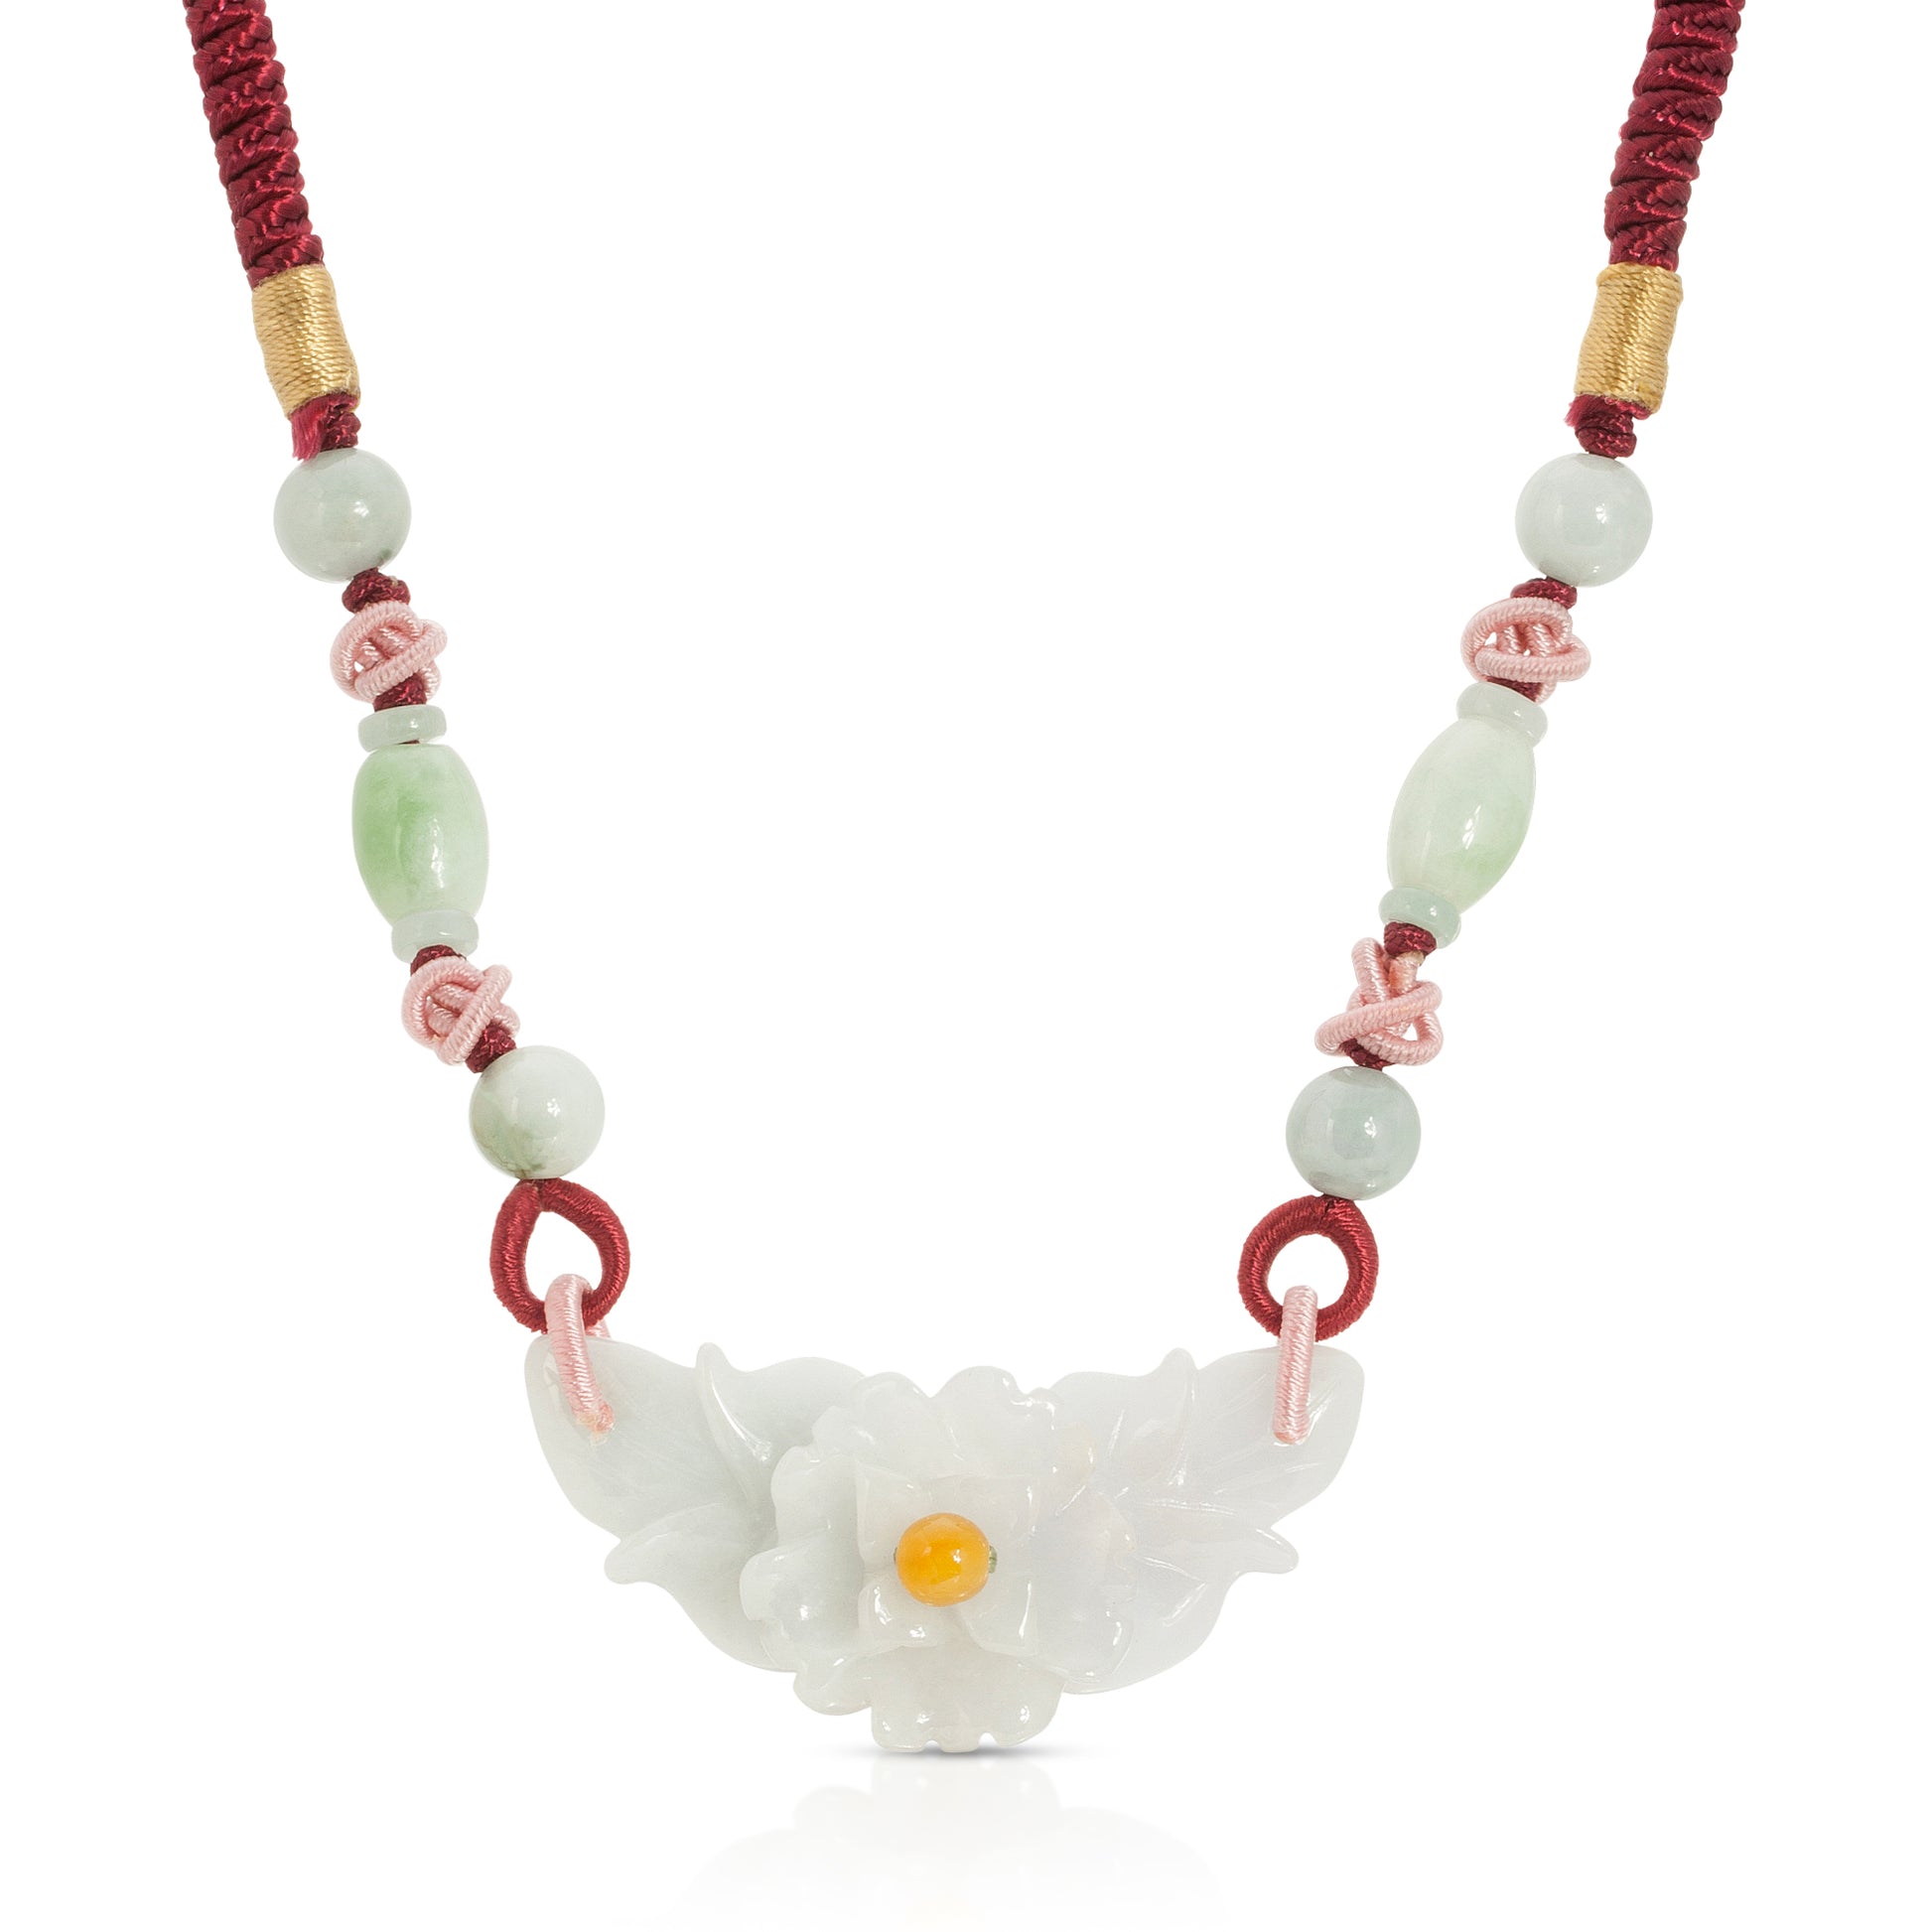 Discover Your True Beauty with a Fortune Flower Handmade Jade Necklace made with Maroon Cord